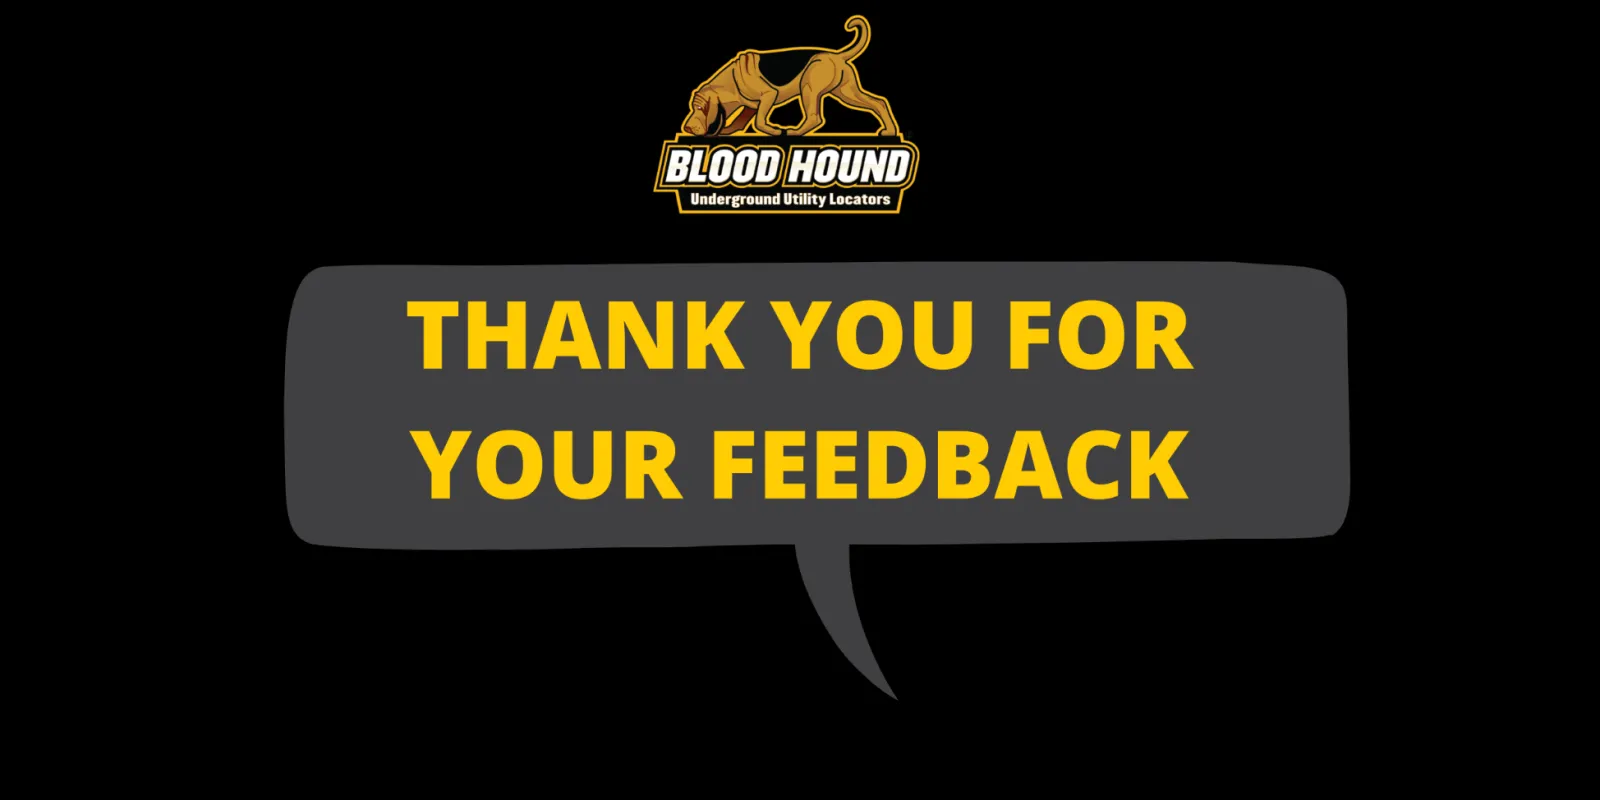 Blood Hound would like to thank those who took the time to share their feedback.